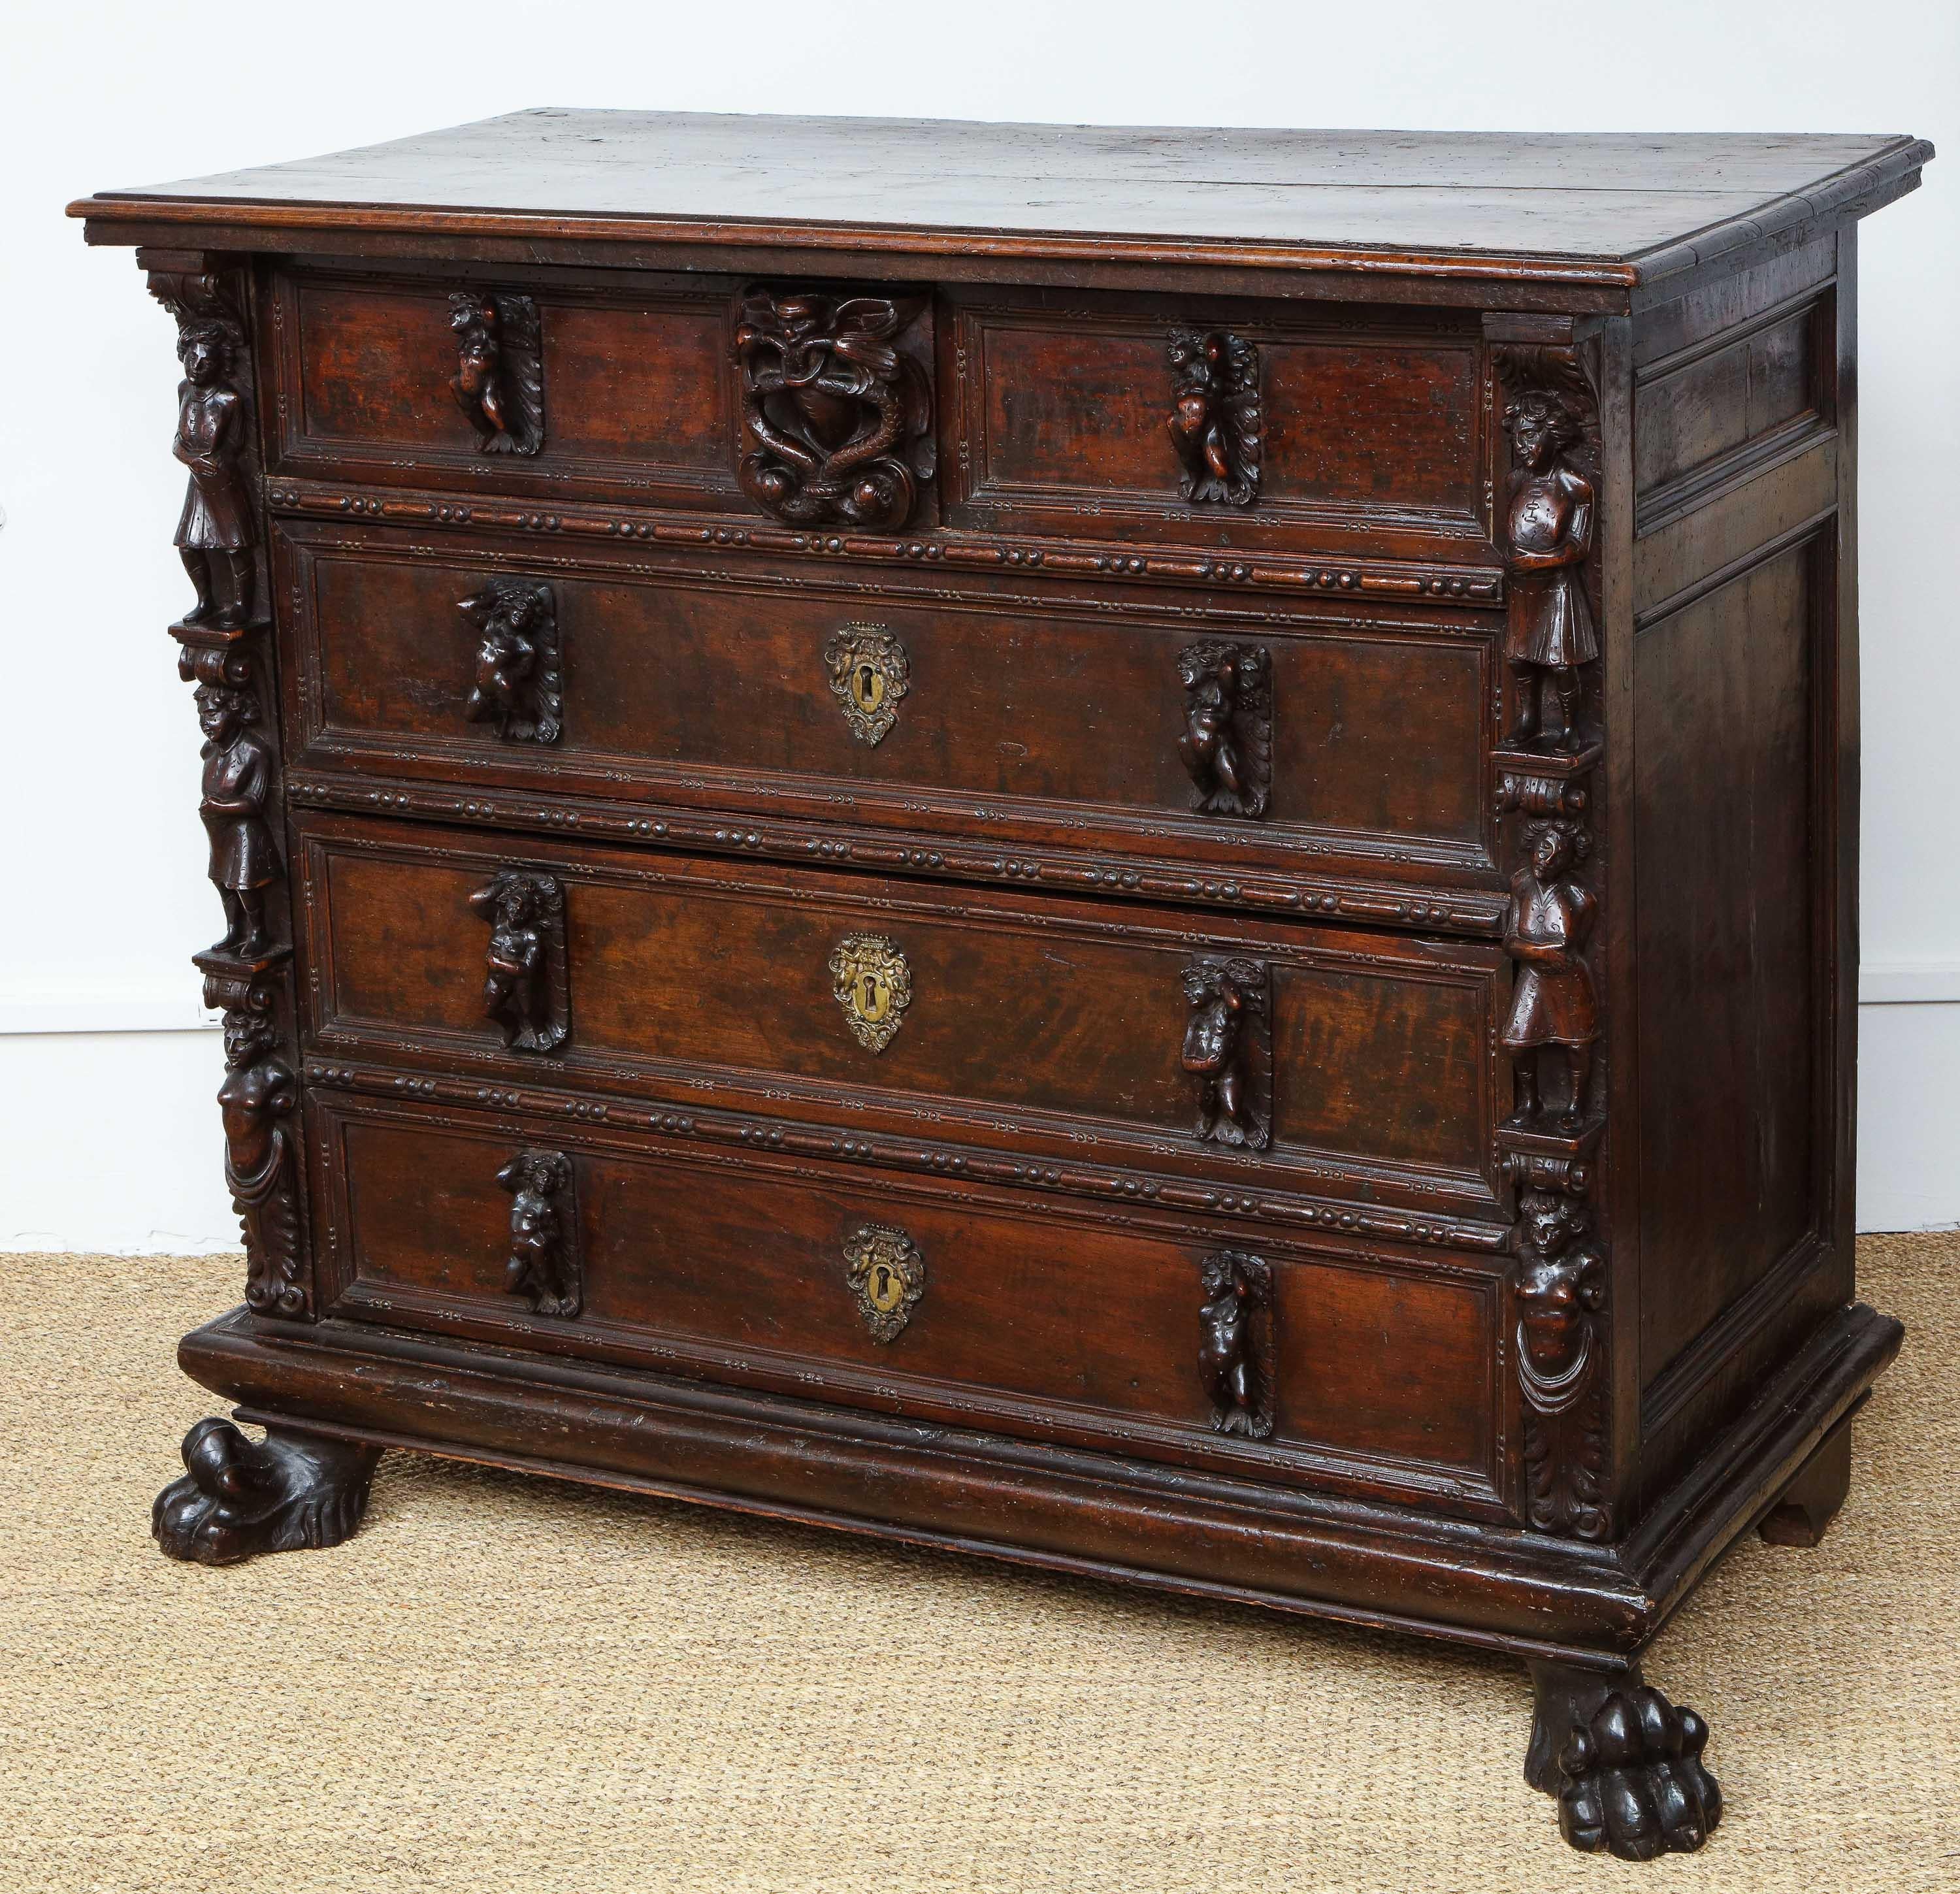 An Italian carved walnut chest of drawers ‘a bambocci', Genoese, early 17th century, the rectangular top with molded edge above four rows of frieze drawers, the central one with two vines and demon mask flanking two short and above three long